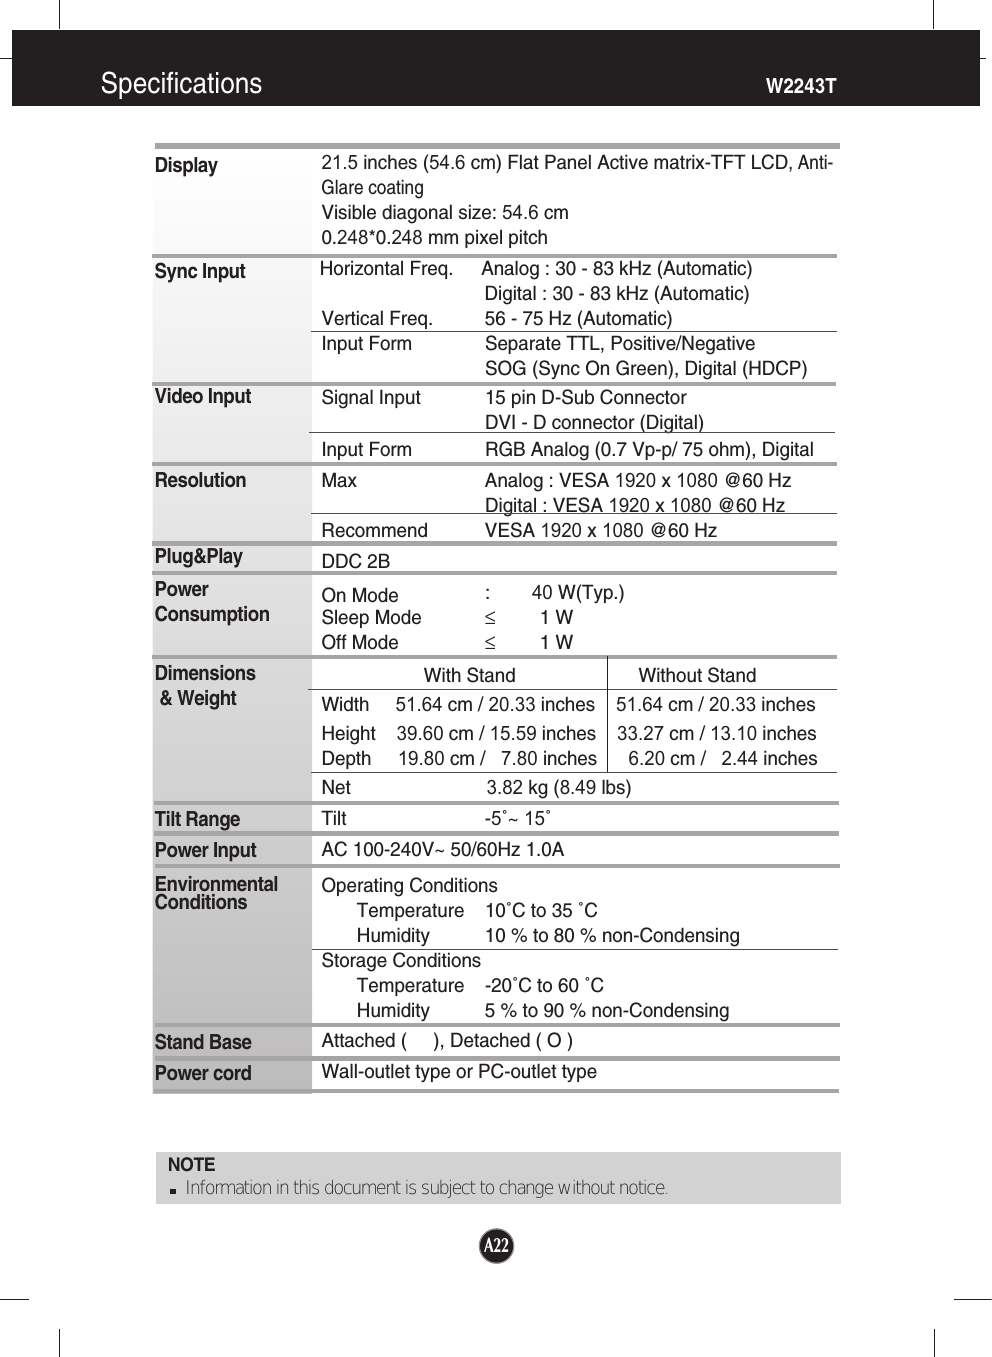 Specifications                                                                     W2243TNOTEInformation in this document is subject to change without notice.DisplaySync InputVideo InputResolutionPlug&amp;PlayPowerConsumptionDimensions&amp; WeightTilt RangePower InputEnvironmentalConditionsStand Base Power cord 21.5 inches (54.6 cm) Flat Panel Active matrix-TFT LCD, Anti-Glare coatingVisible diagonal size: 54.6 cm0.248*0.248 mm pixel pitchHorizontal Freq. Analog : 30 - 83 kHz (Automatic)Digital : 30 - 83 kHz (Automatic)Vertical Freq. 56 - 75 Hz (Automatic)Input Form Separate TTL, Positive/NegativeSOG (Sync On Green), Digital (HDCP)Signal Input 15 pin D-Sub ConnectorDVI - D connector (Digital)Input Form RGB Analog (0.7 Vp-p/ 75 ohm), DigitalMax Analog : VESA 1920 x 1080 @60 HzDigital : VESA 1920 x 1080 @60 HzRecommend VESA 1920 x 1080 @60 HzDDC 2B   On Mode :        40 W(Typ.)Sleep Mode ≤1 WOff Mode ≤1 WWith Stand Without StandWidth     51.64 cm / 20.33 inches    51.64 cm / 20.33 inchesHeight    39.60 cm / 15.59 inches    33.27 cm / 13.10 inches Depth     19.80 cm /   7.80 inches      6.20 cm /   2.44 inchesNet                          3.82 kg (8.49 lbs)Tilt -5˚~ 15˚AC 100-240V~ 50/60Hz 1.0A Operating ConditionsTemperature 10˚C to 35 ˚CHumidity 10 % to 80 % non-CondensingStorage ConditionsTemperature -20˚C to 60 ˚C Humidity 5 % to 90 % non-CondensingAttached (     ), Detached ( O )Wall-outlet type or PC-outlet typeA22A22